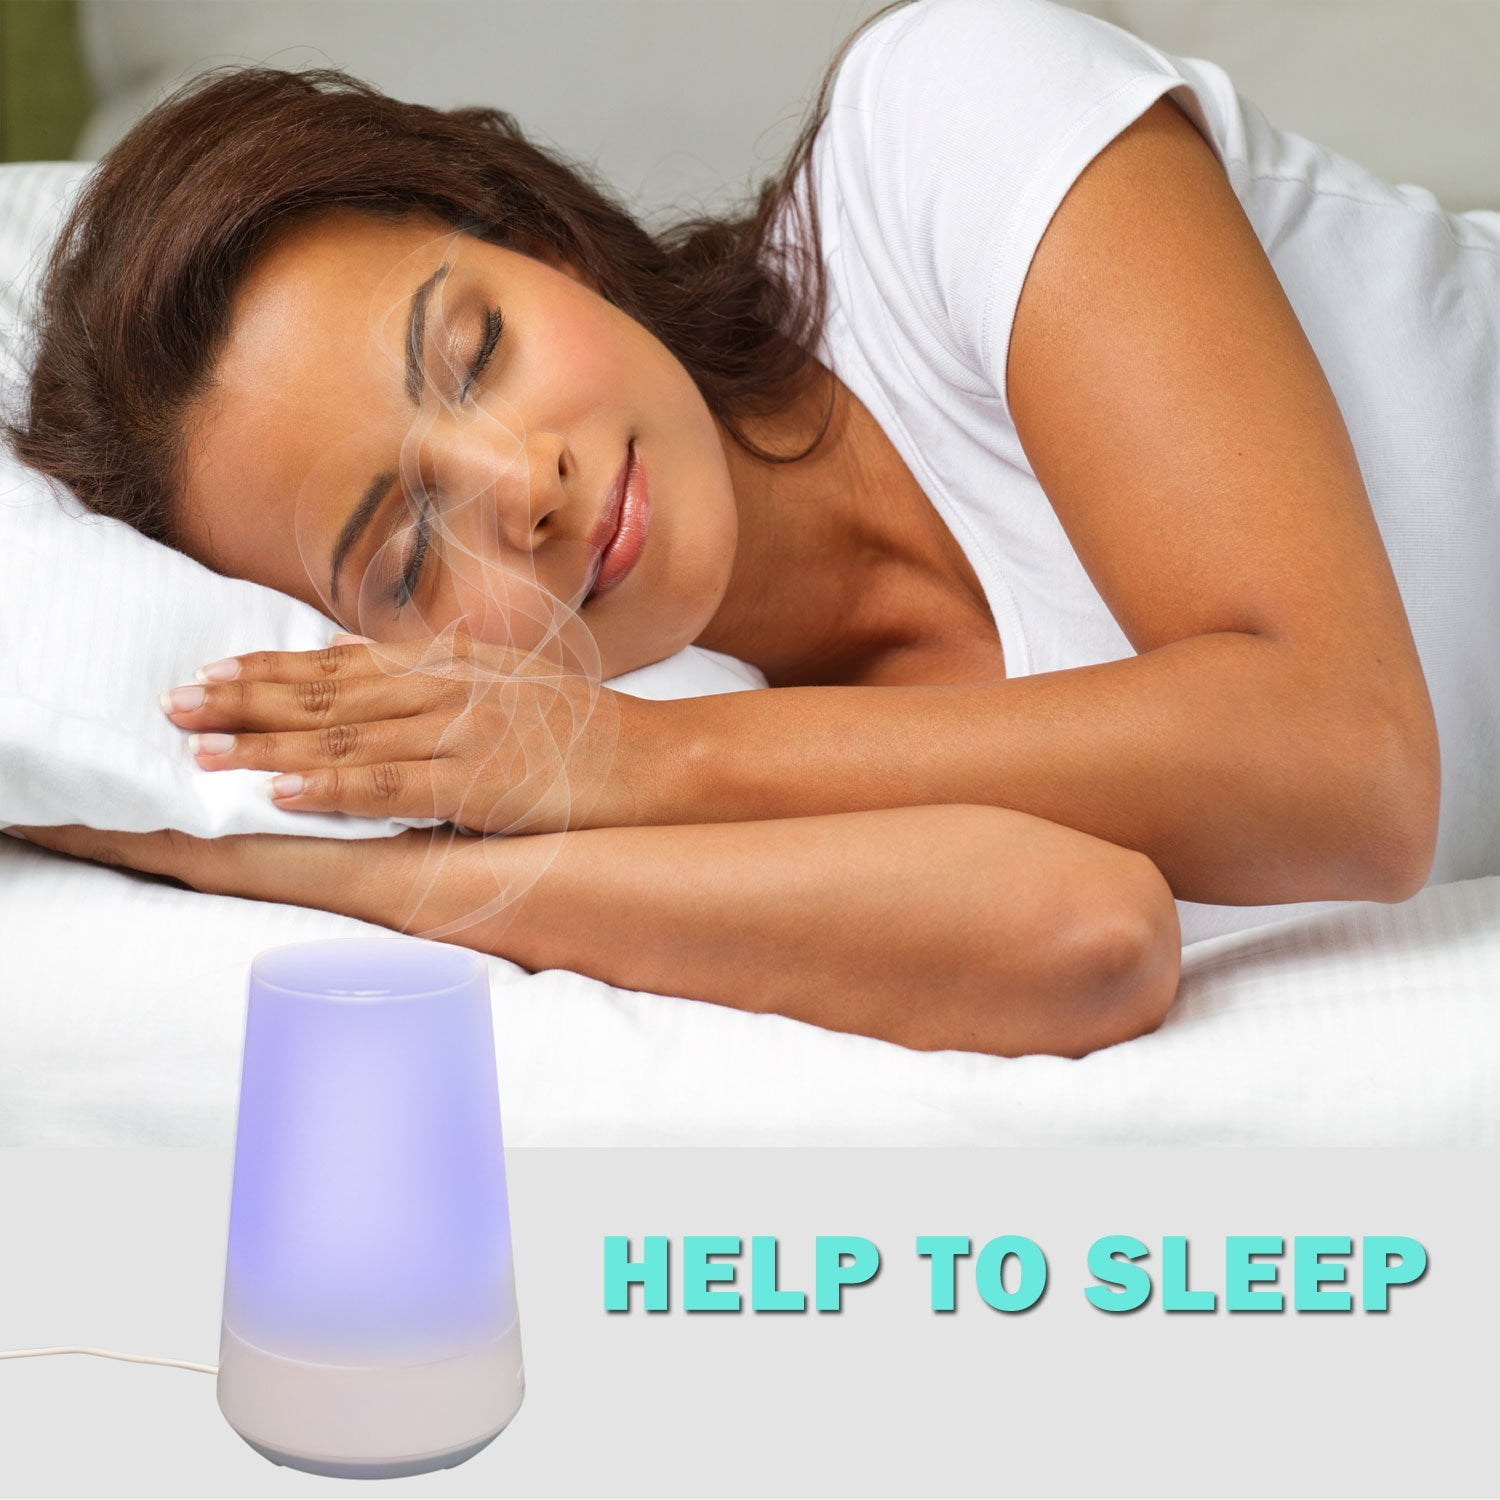 Details about   Mainstays Ultrasonic Nightlight Compact Humidifier w/ Aroma 200ml Capacity White 